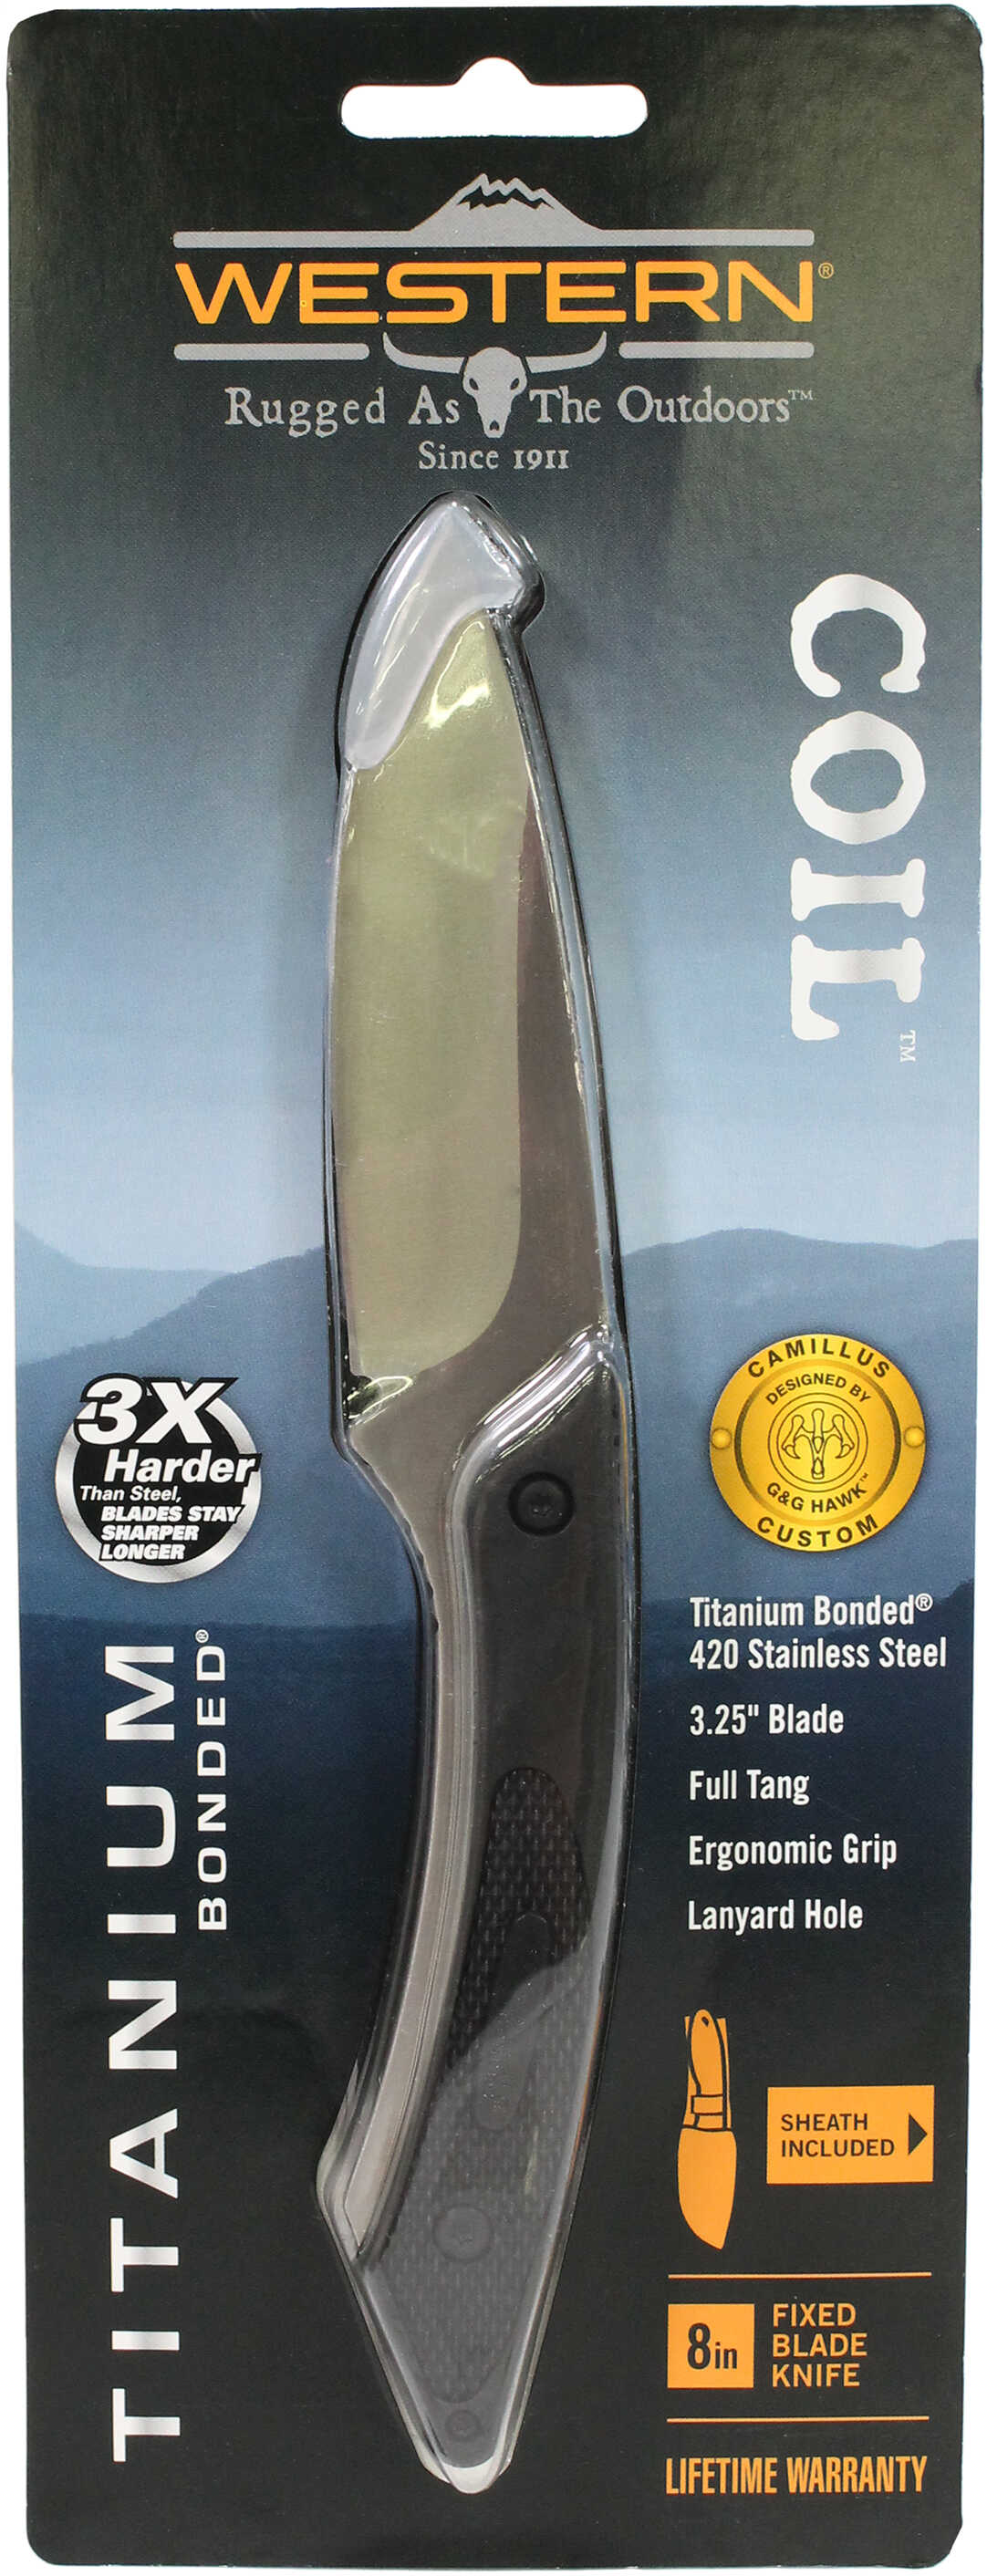 Western Coil 8 inch Fixed Blade Knife 2.75in